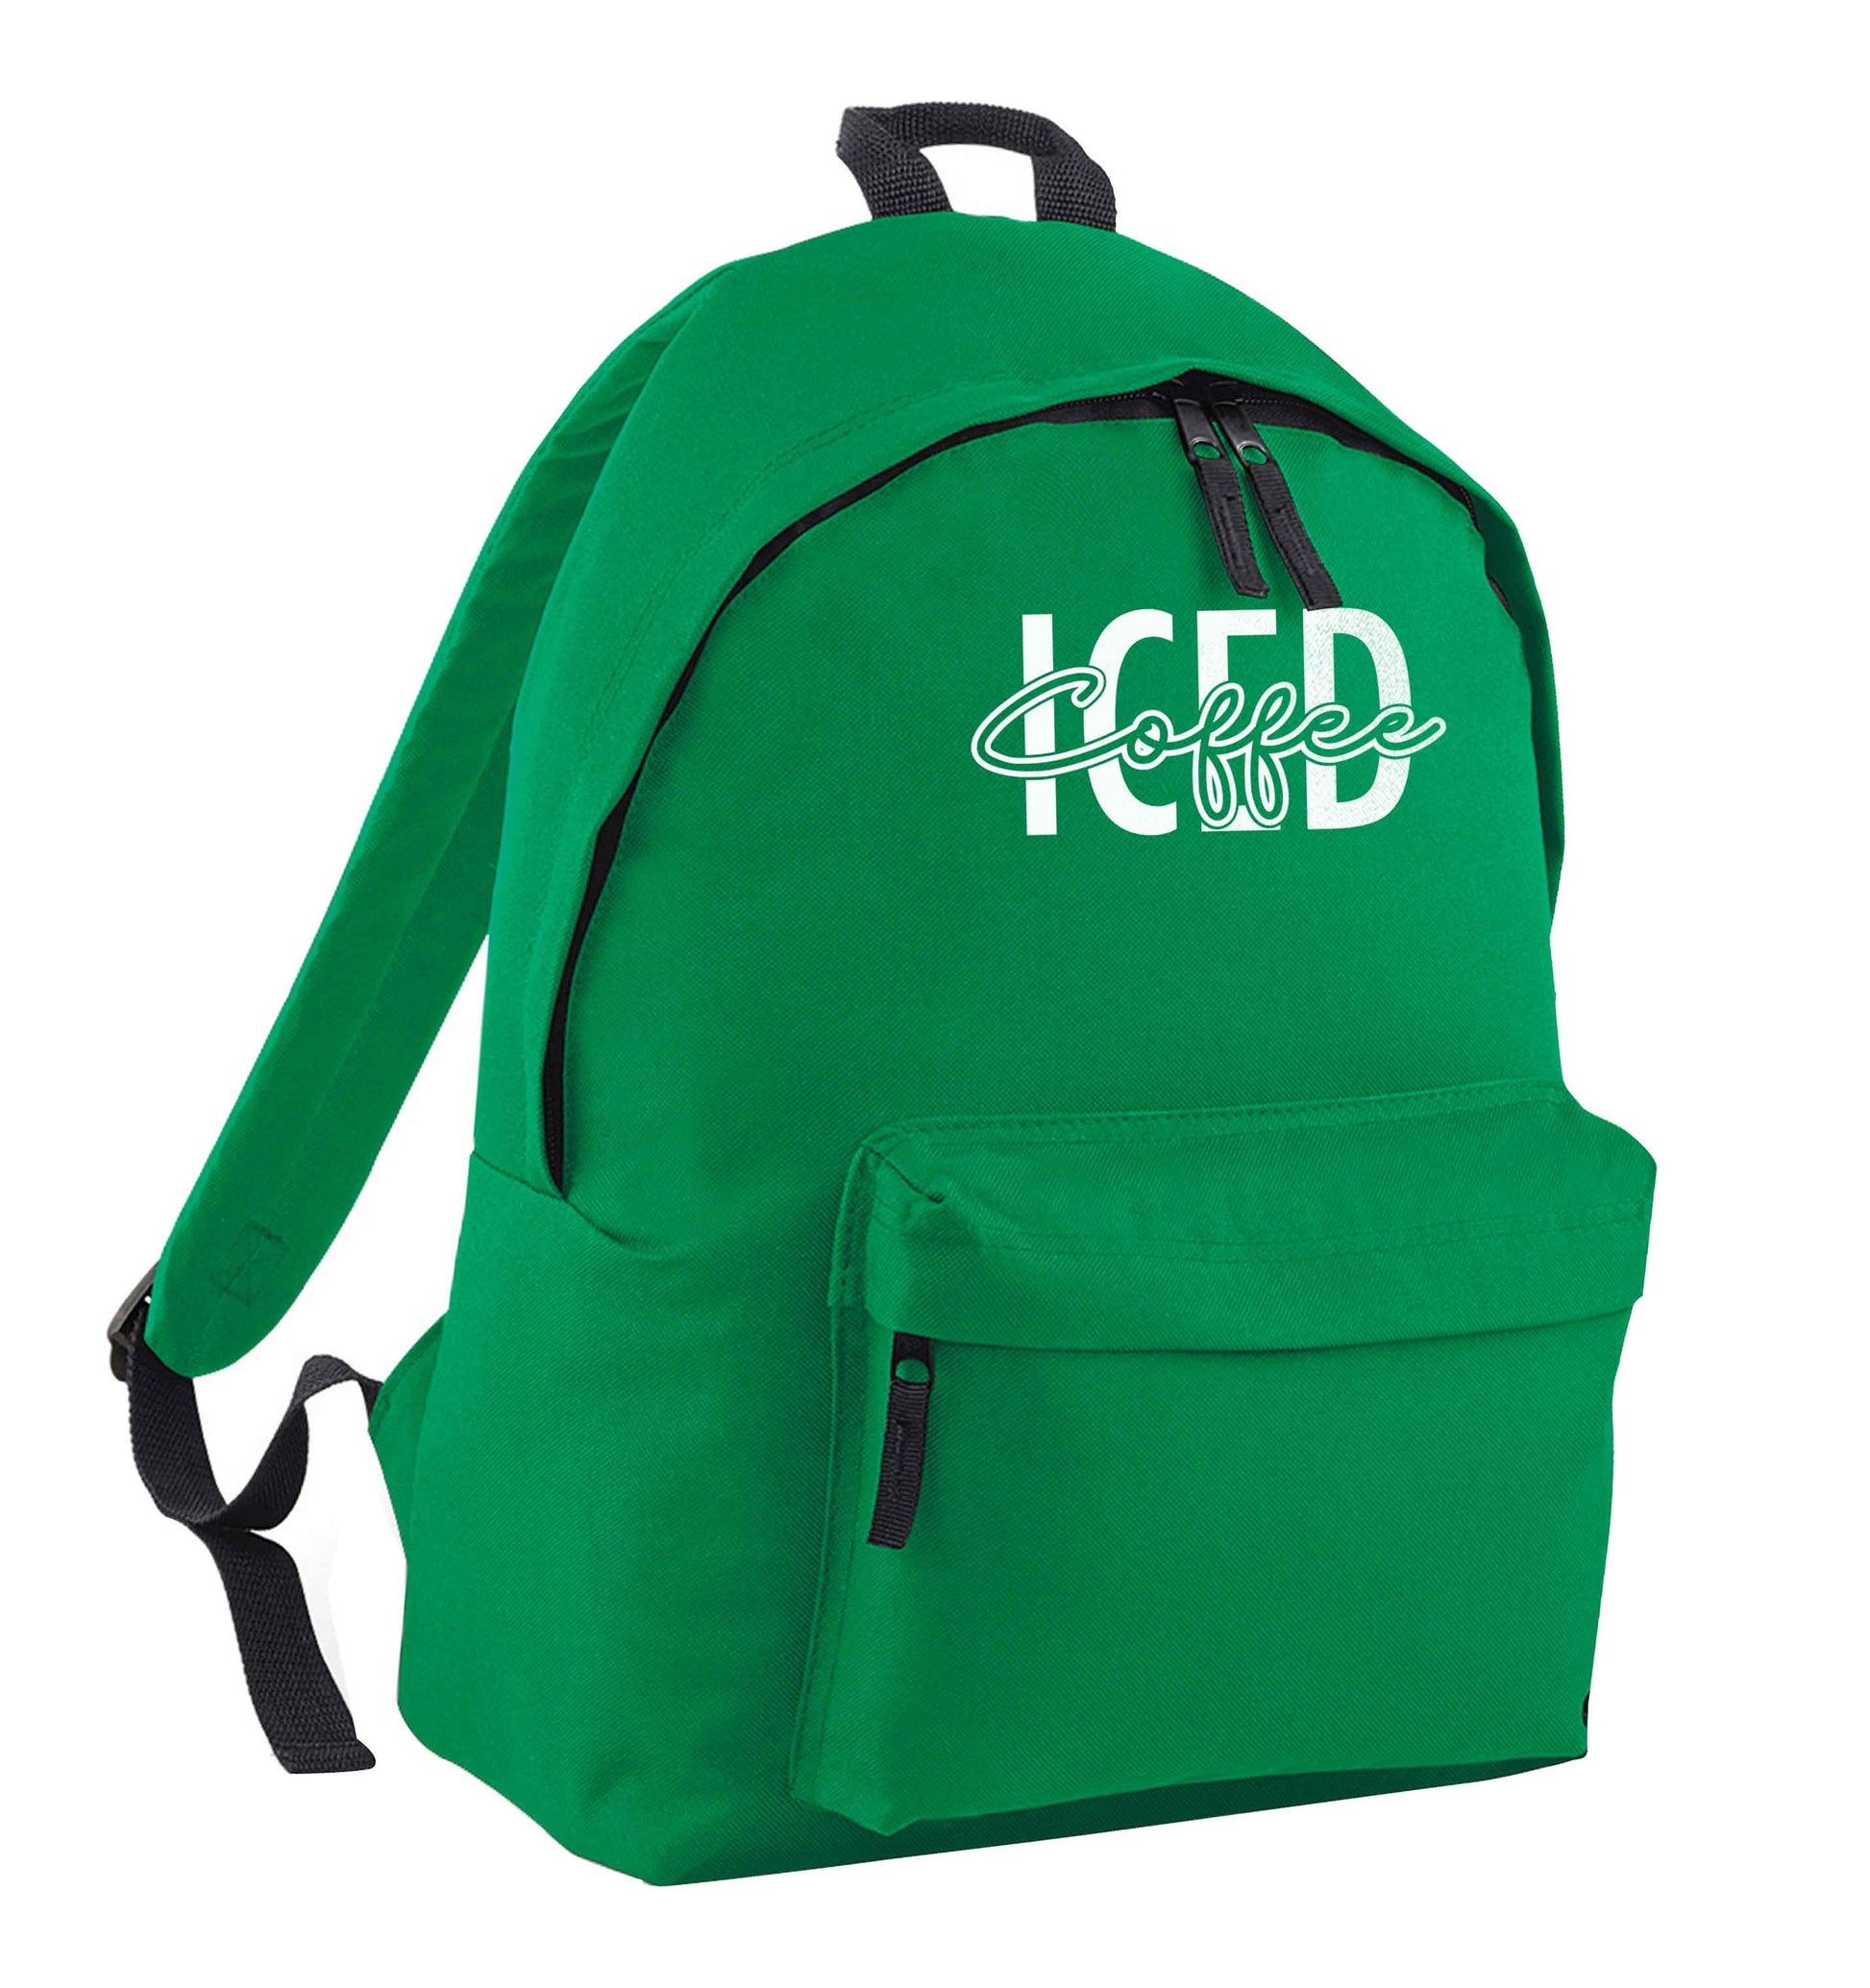 Iced Coffee green adults backpack